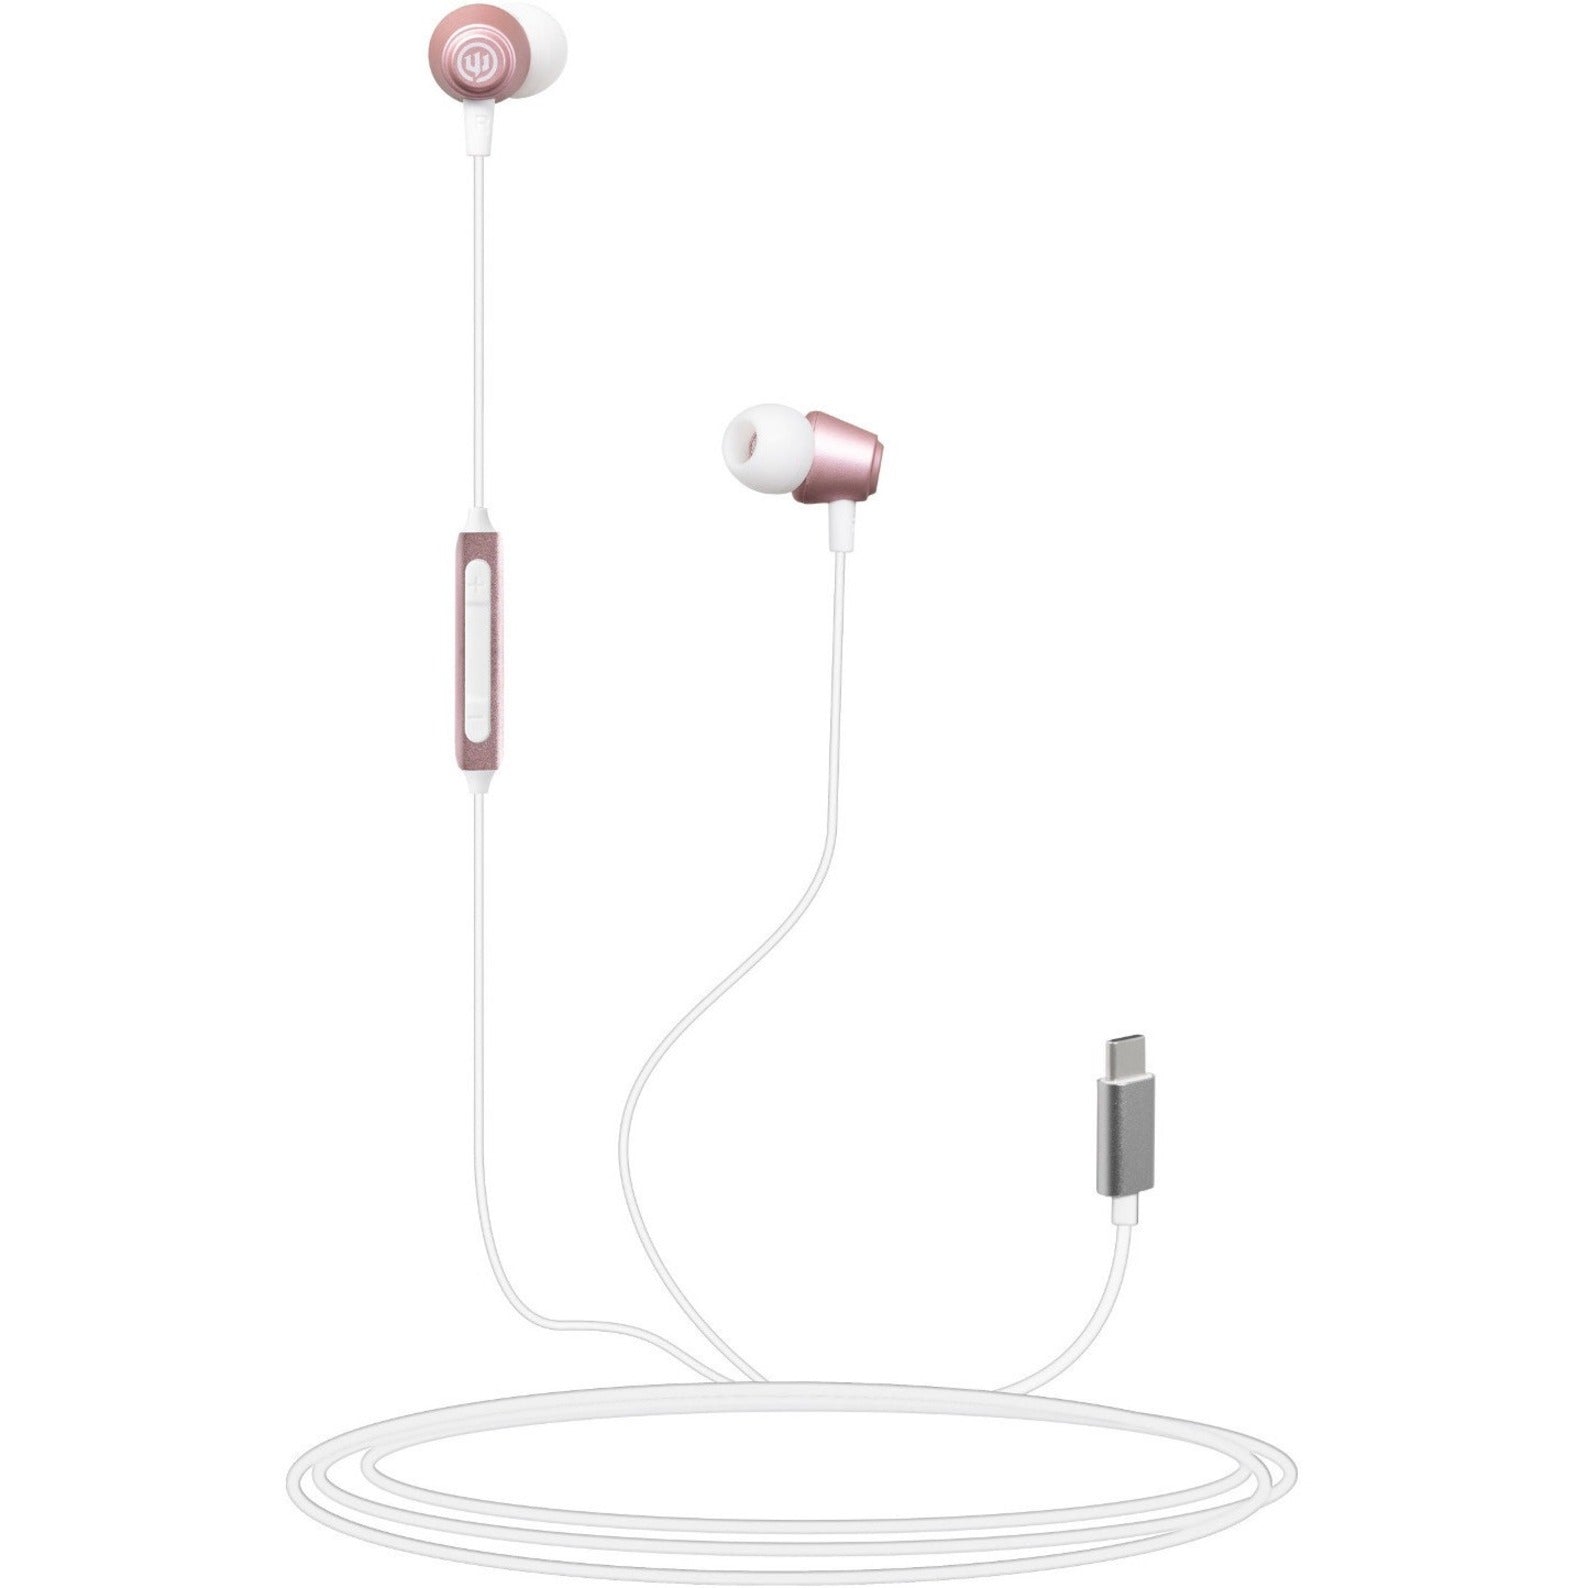 Wicked WI-4151 Ravian Earset, Rose Gold, Bass Boost, Comfortable